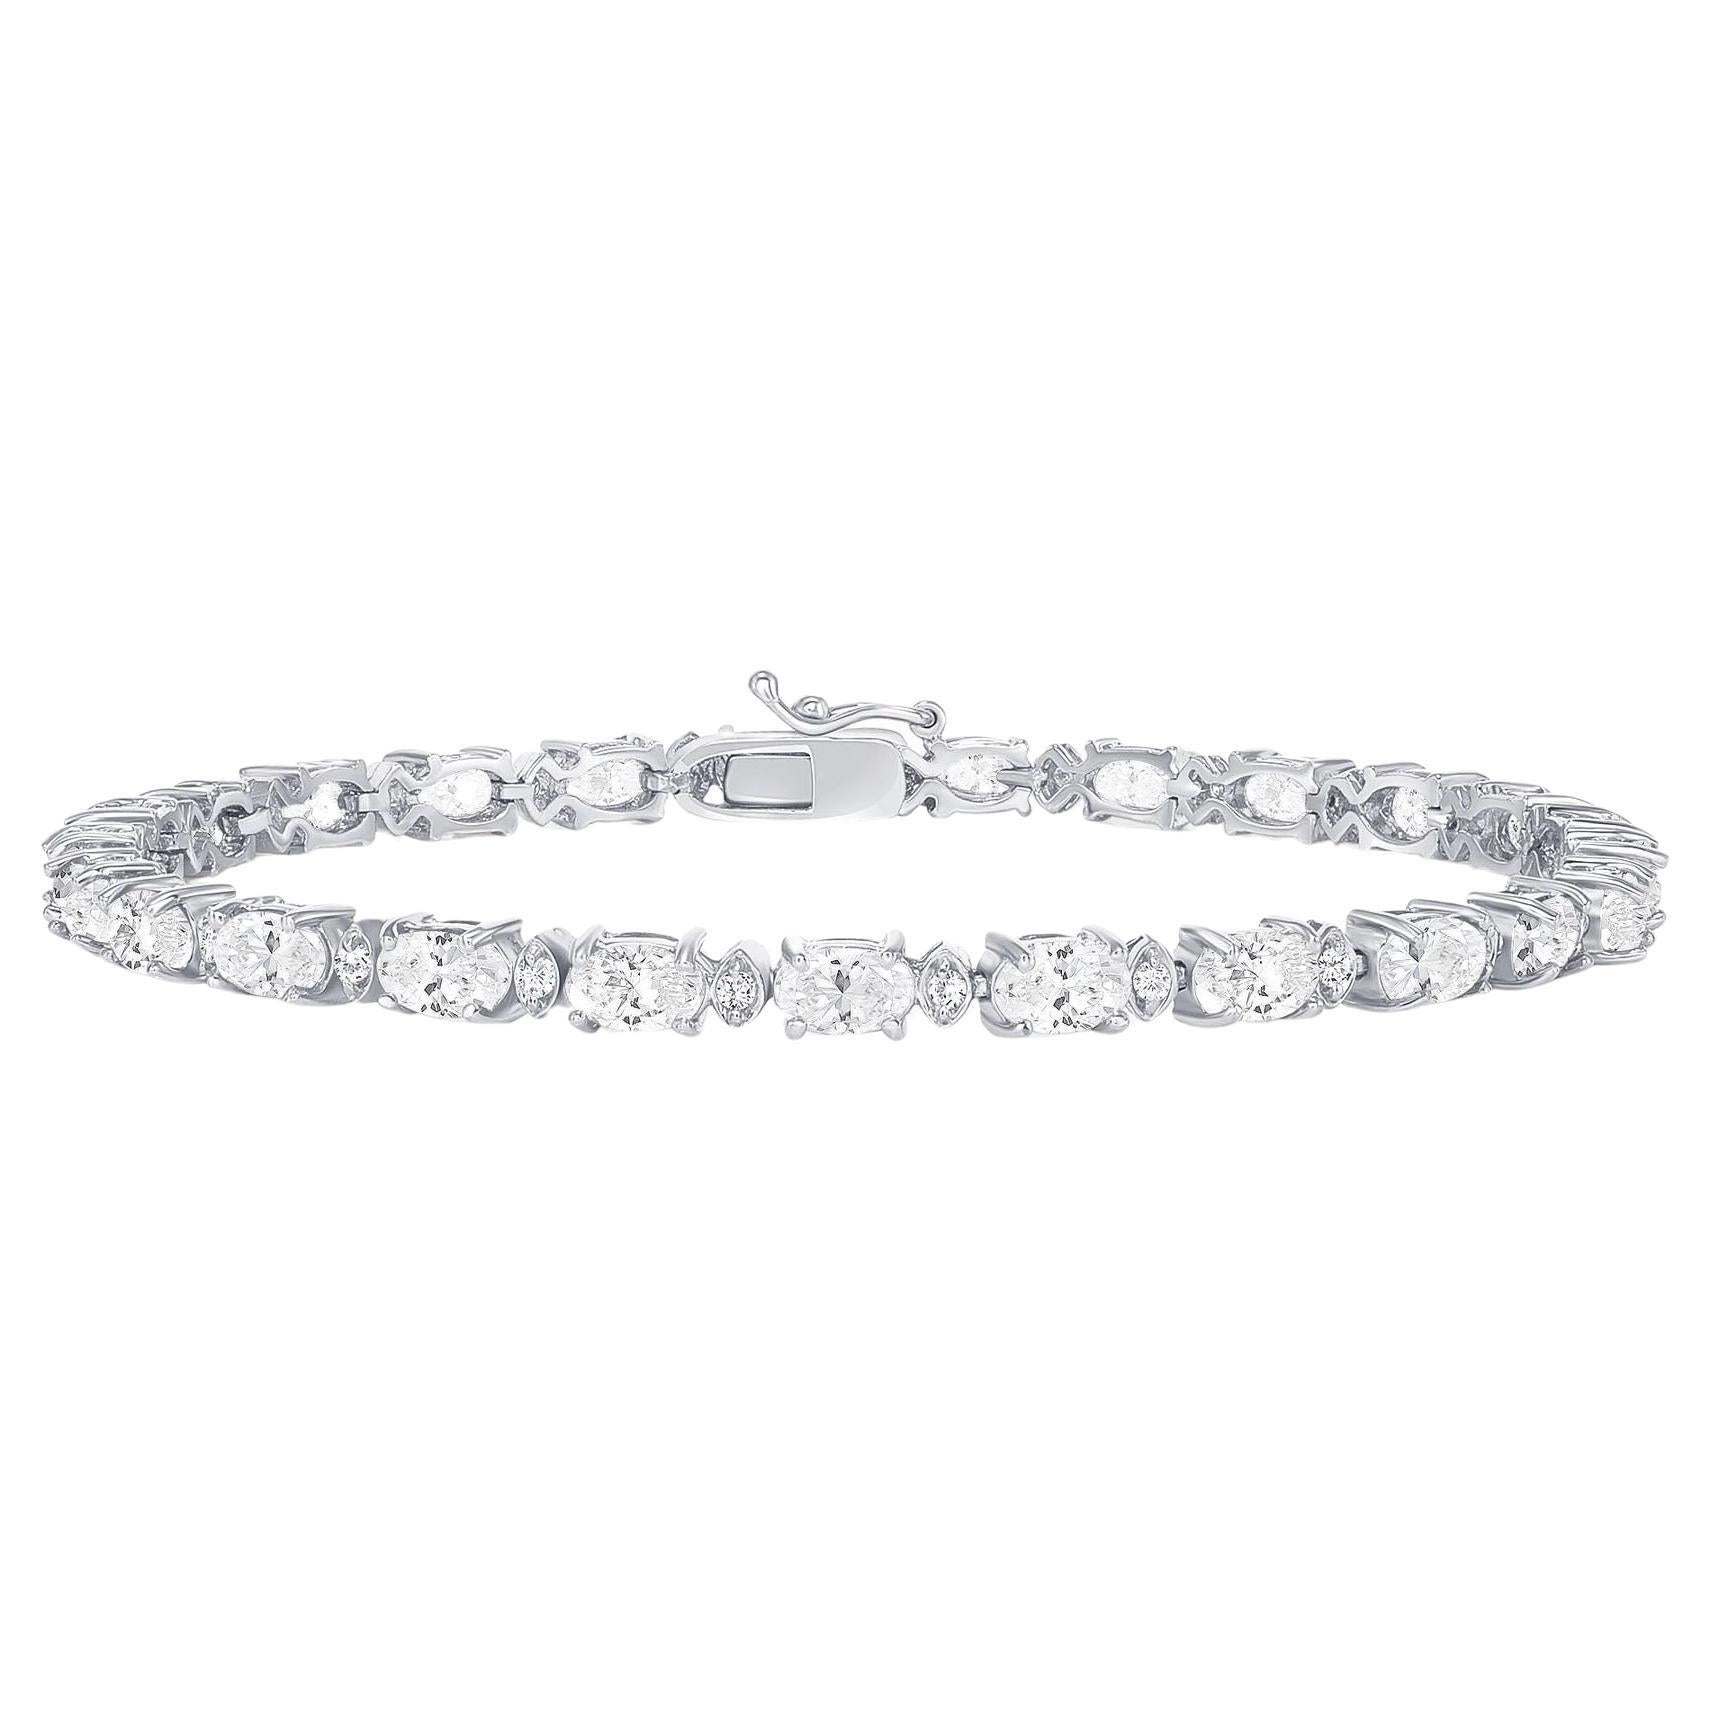 This bracelet is great compliment any outfit. Perfect gift for Anniversary, Birthday, Valentine's, and Holidays.

Bracelet Information
Metal : 14k Gold
Diamond Cut : Oval Cut Natural Conflict Free Diamond & Small Round Cut Natural Diamonds
Diamond